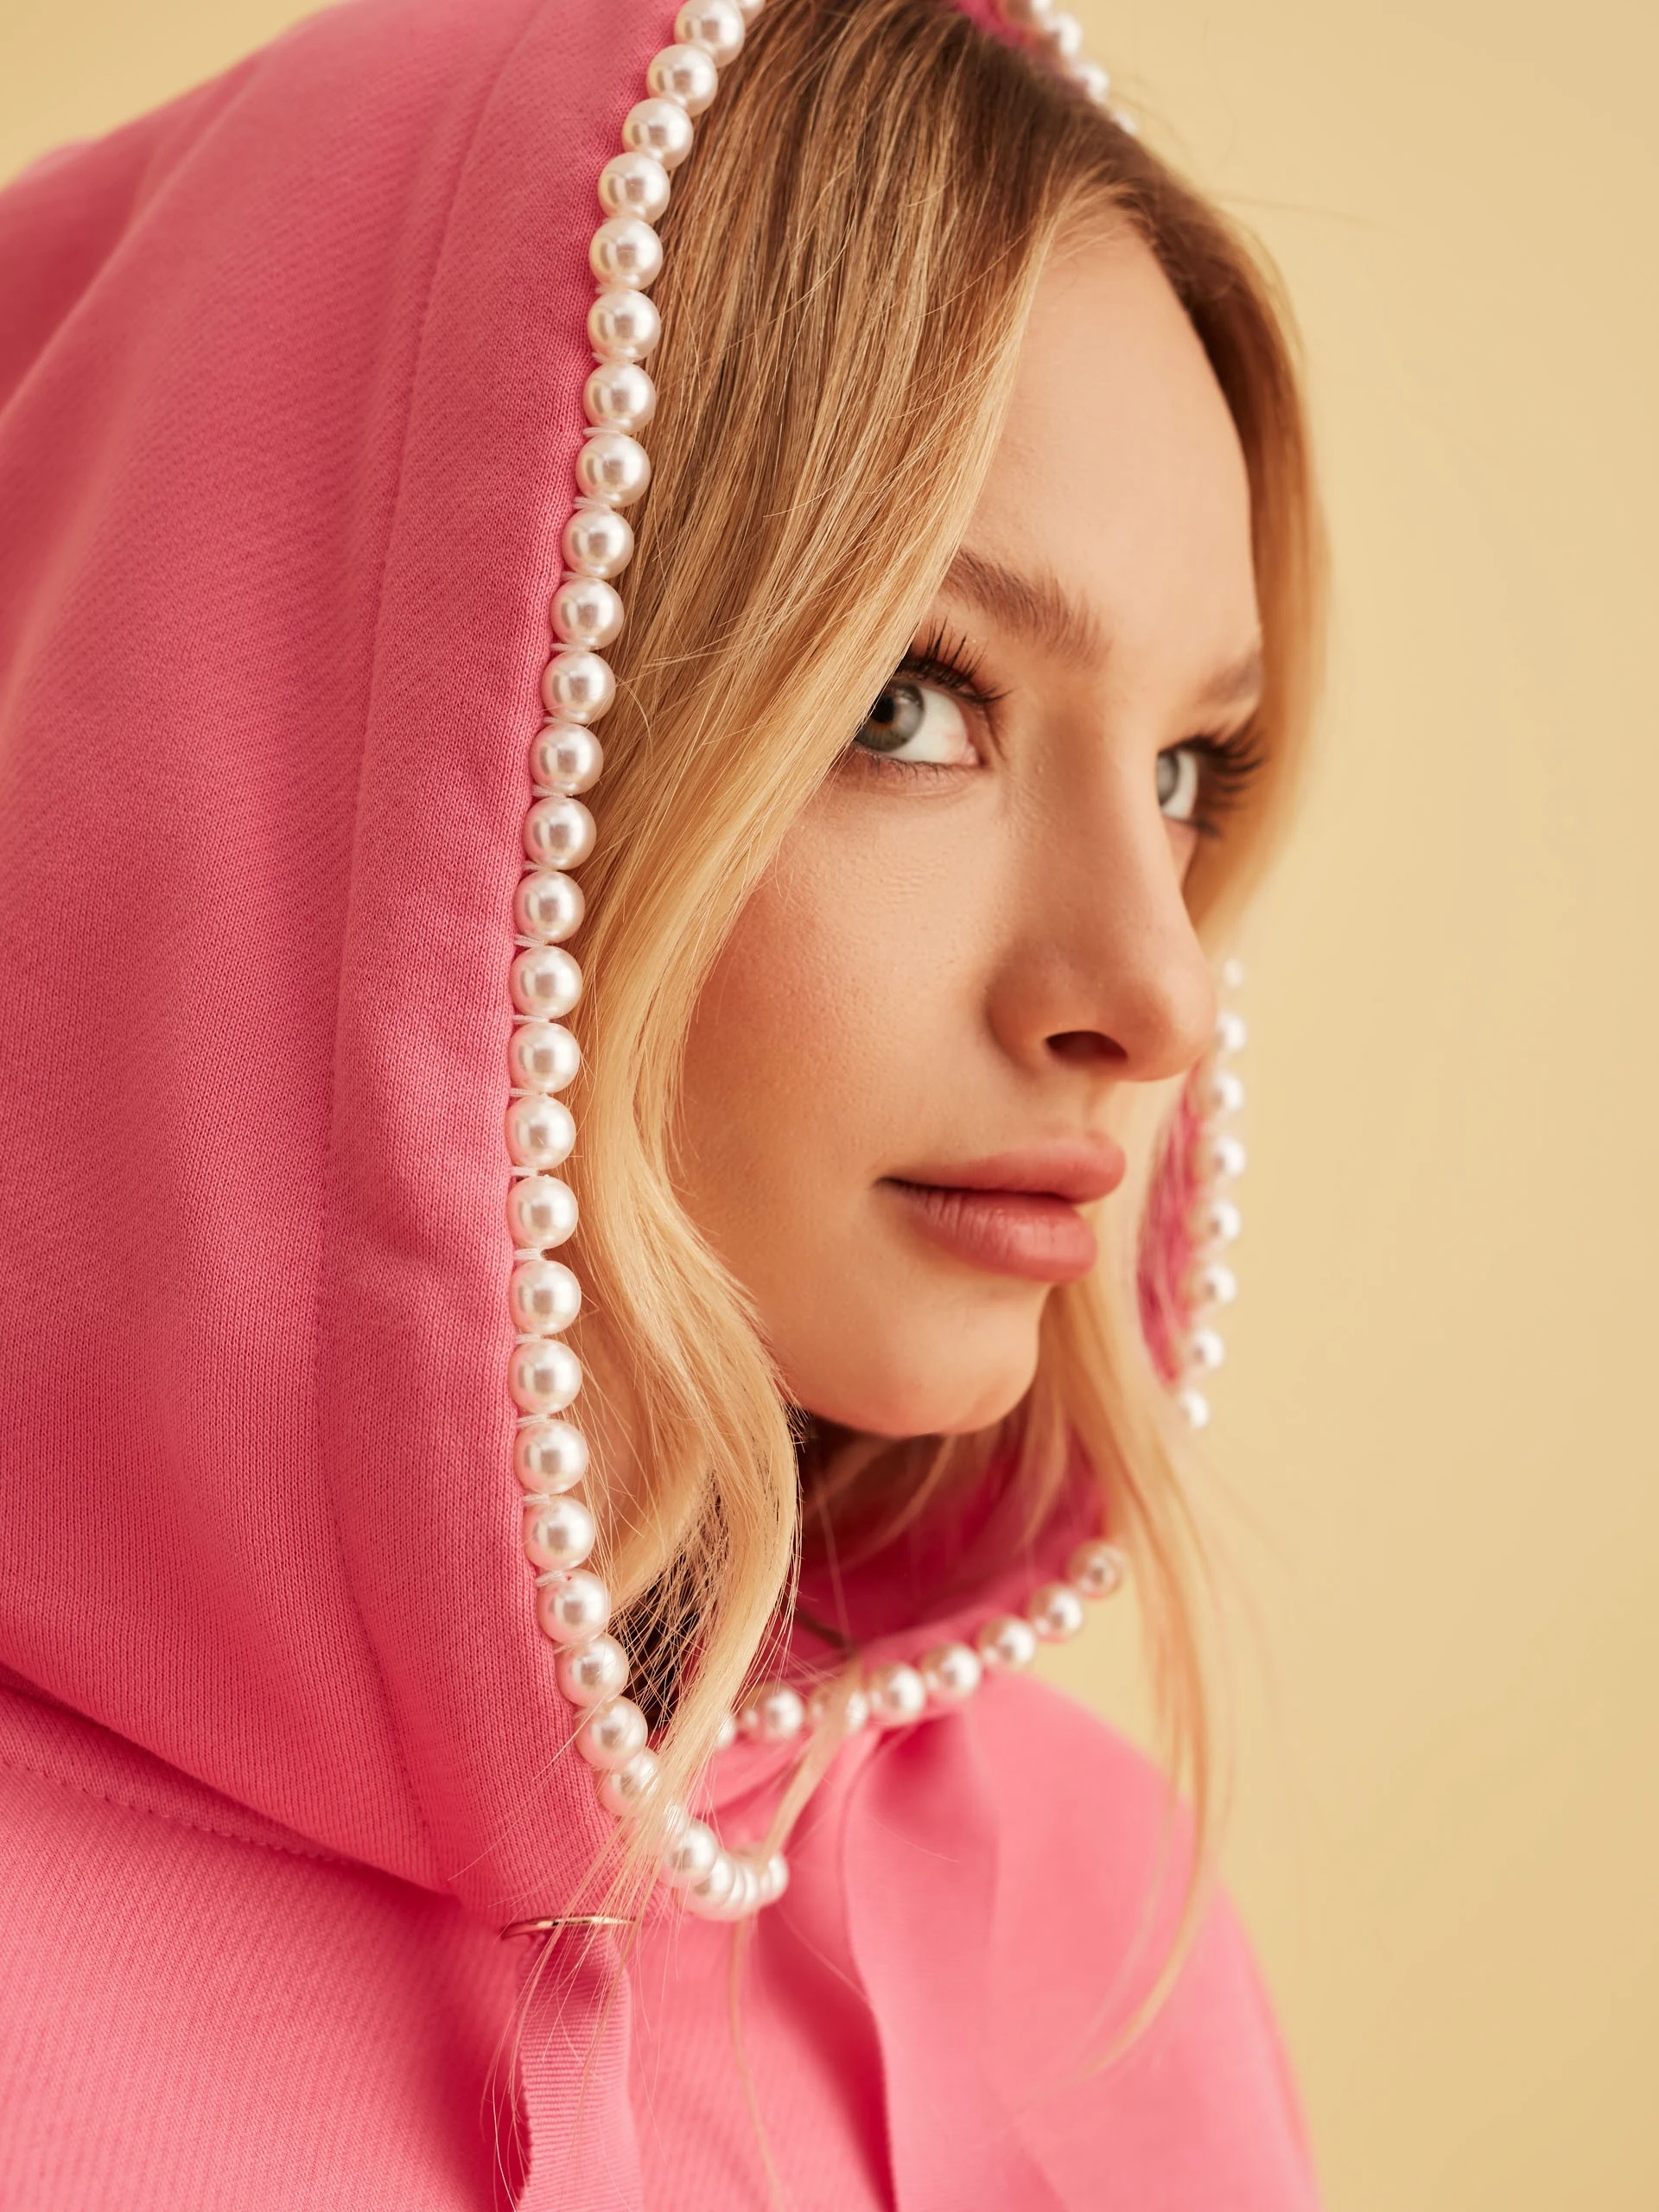 PINK BLOUSE WITH PEARL DETAILS ON HOOD